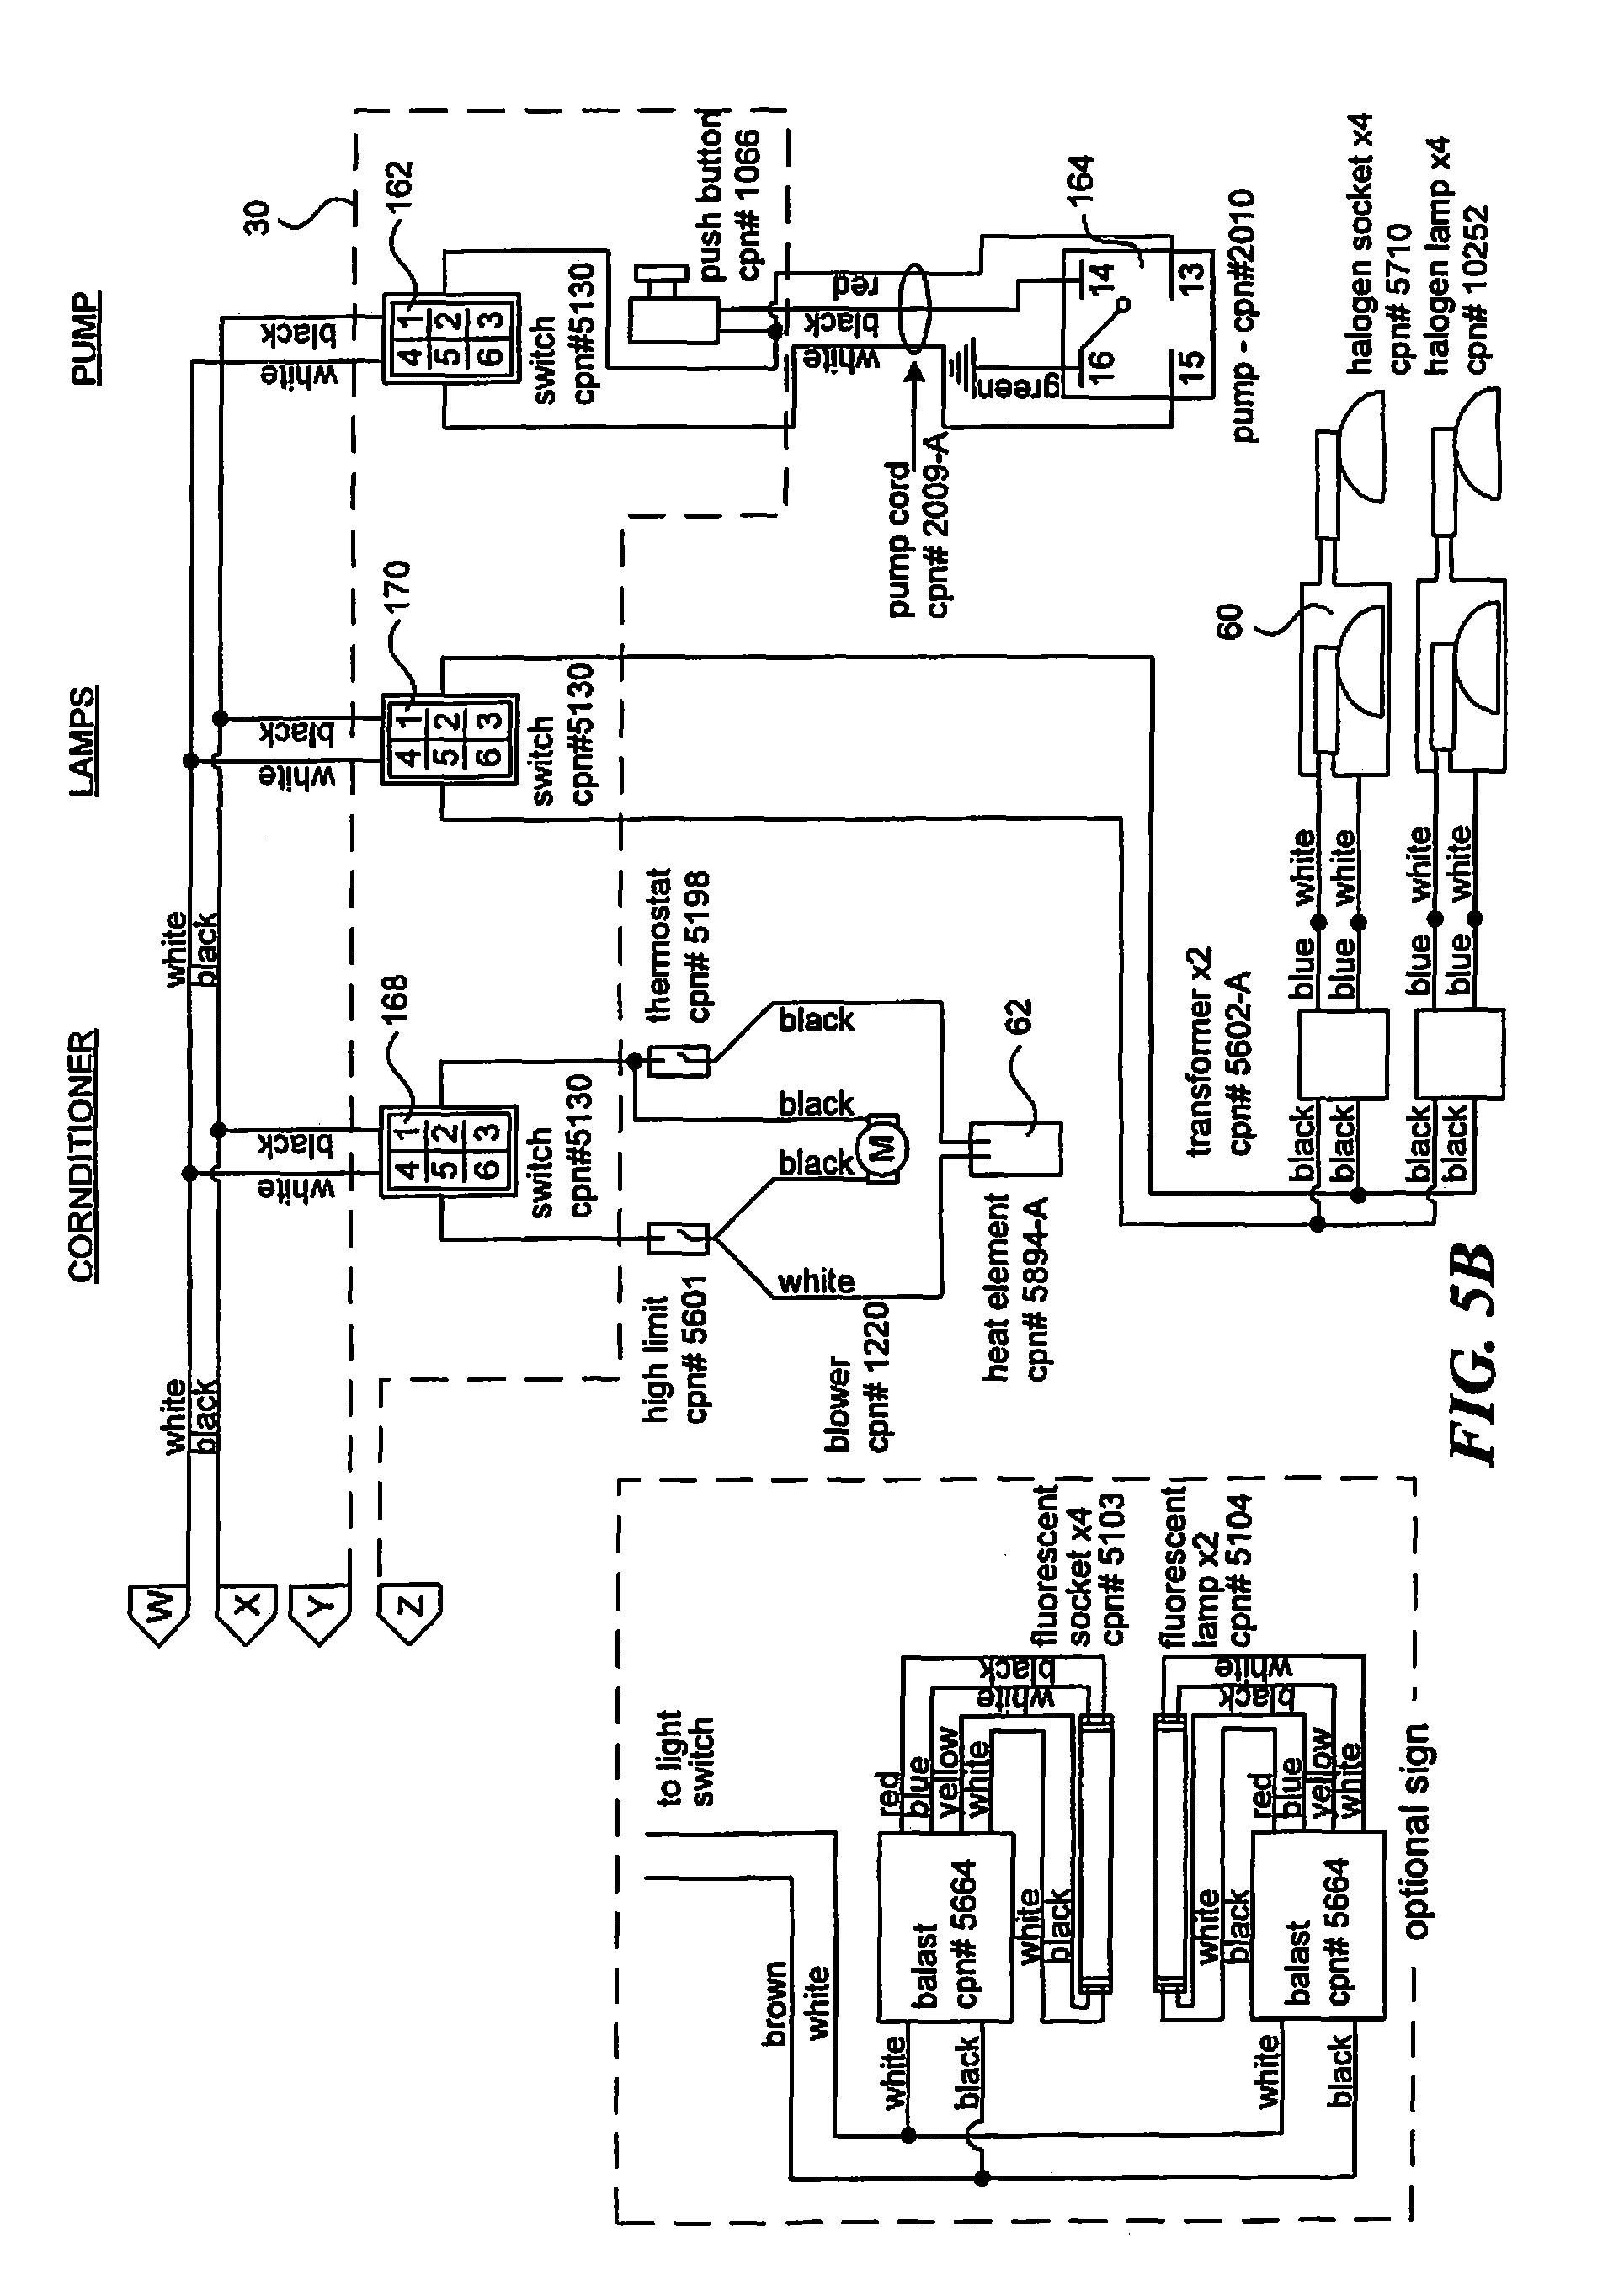 Ansul System Typical Wiring Diagram